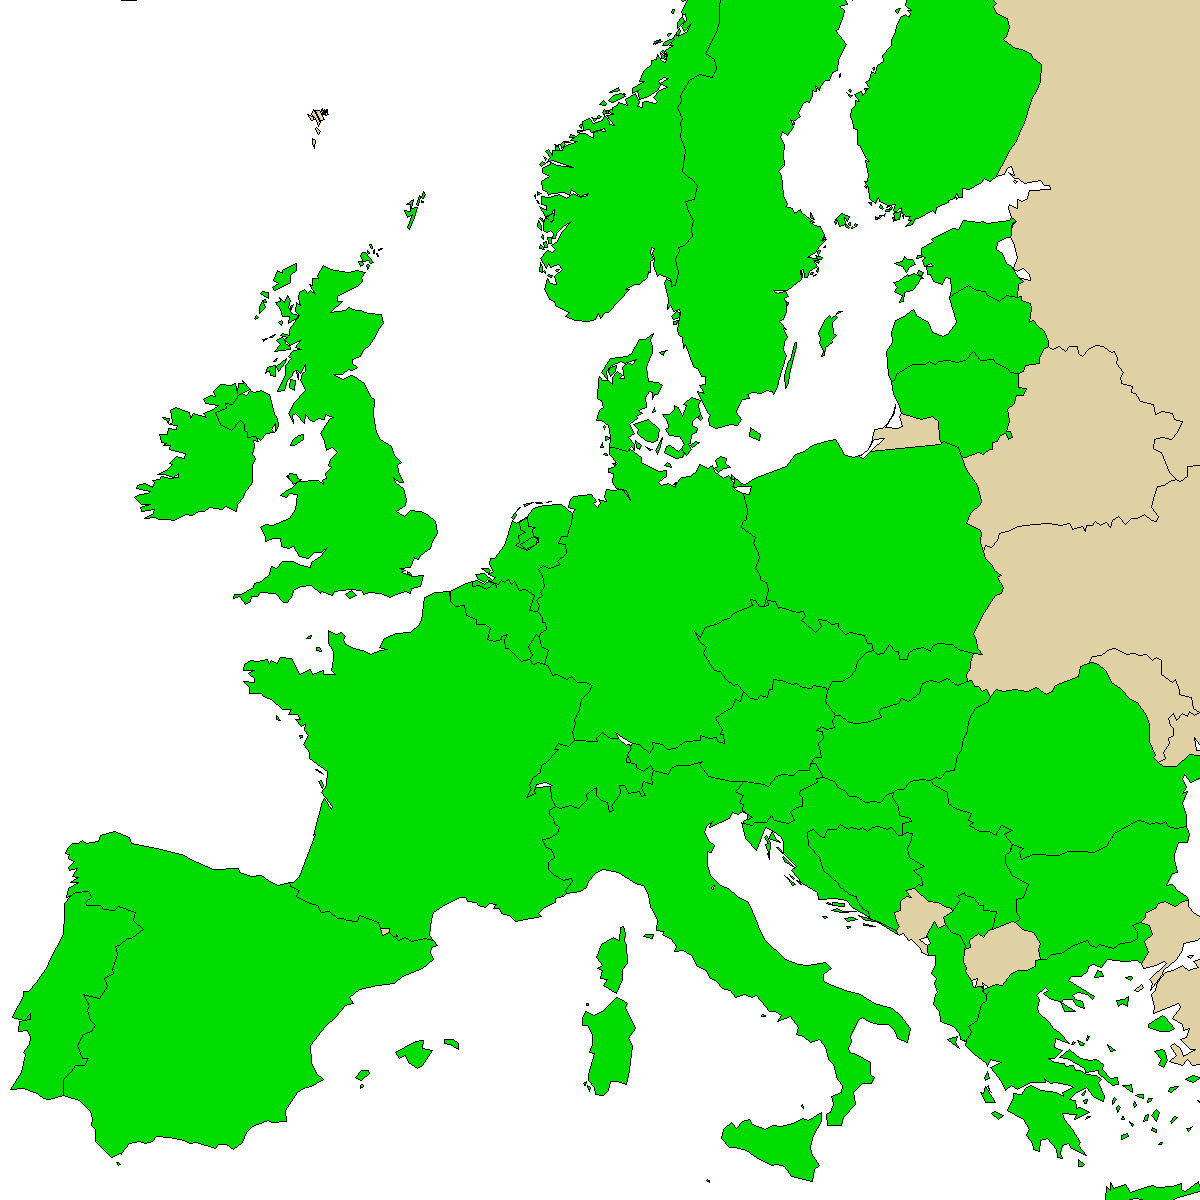 legal info map for our product CBD, green are countries with no ban, red with ban, grey is unknown